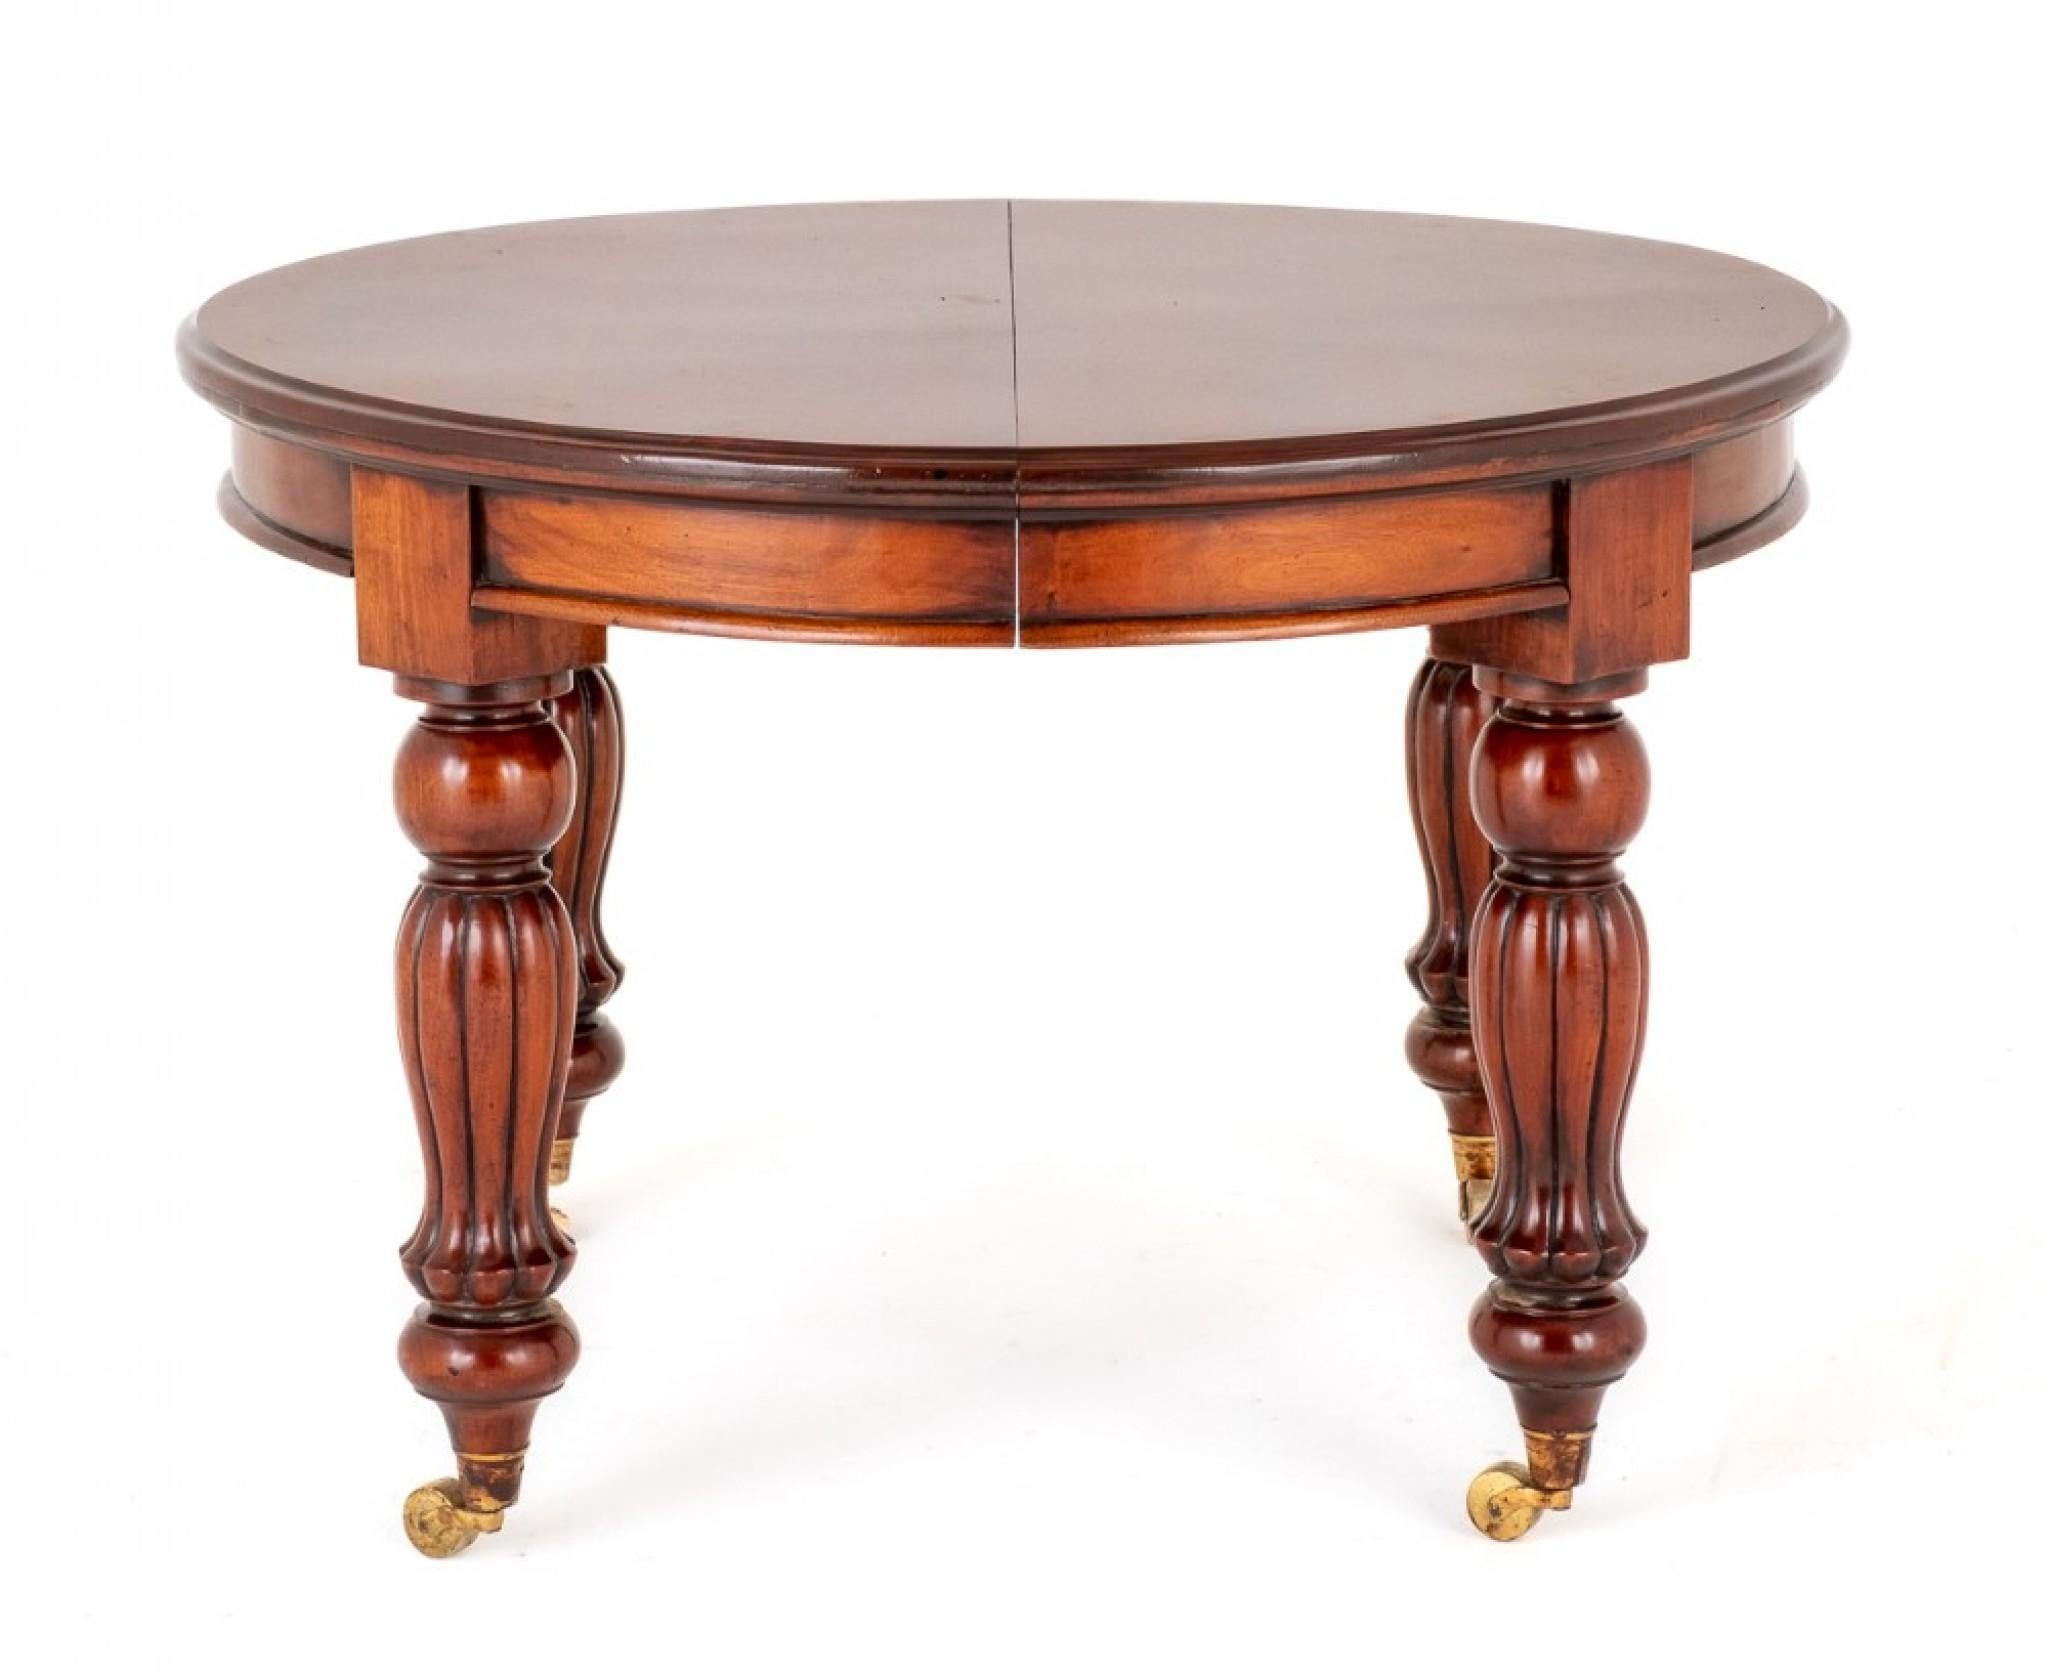 Victorian Dining Table Extending Leaf System Antique 1860 Mahogany In Good Condition For Sale In Potters Bar, GB